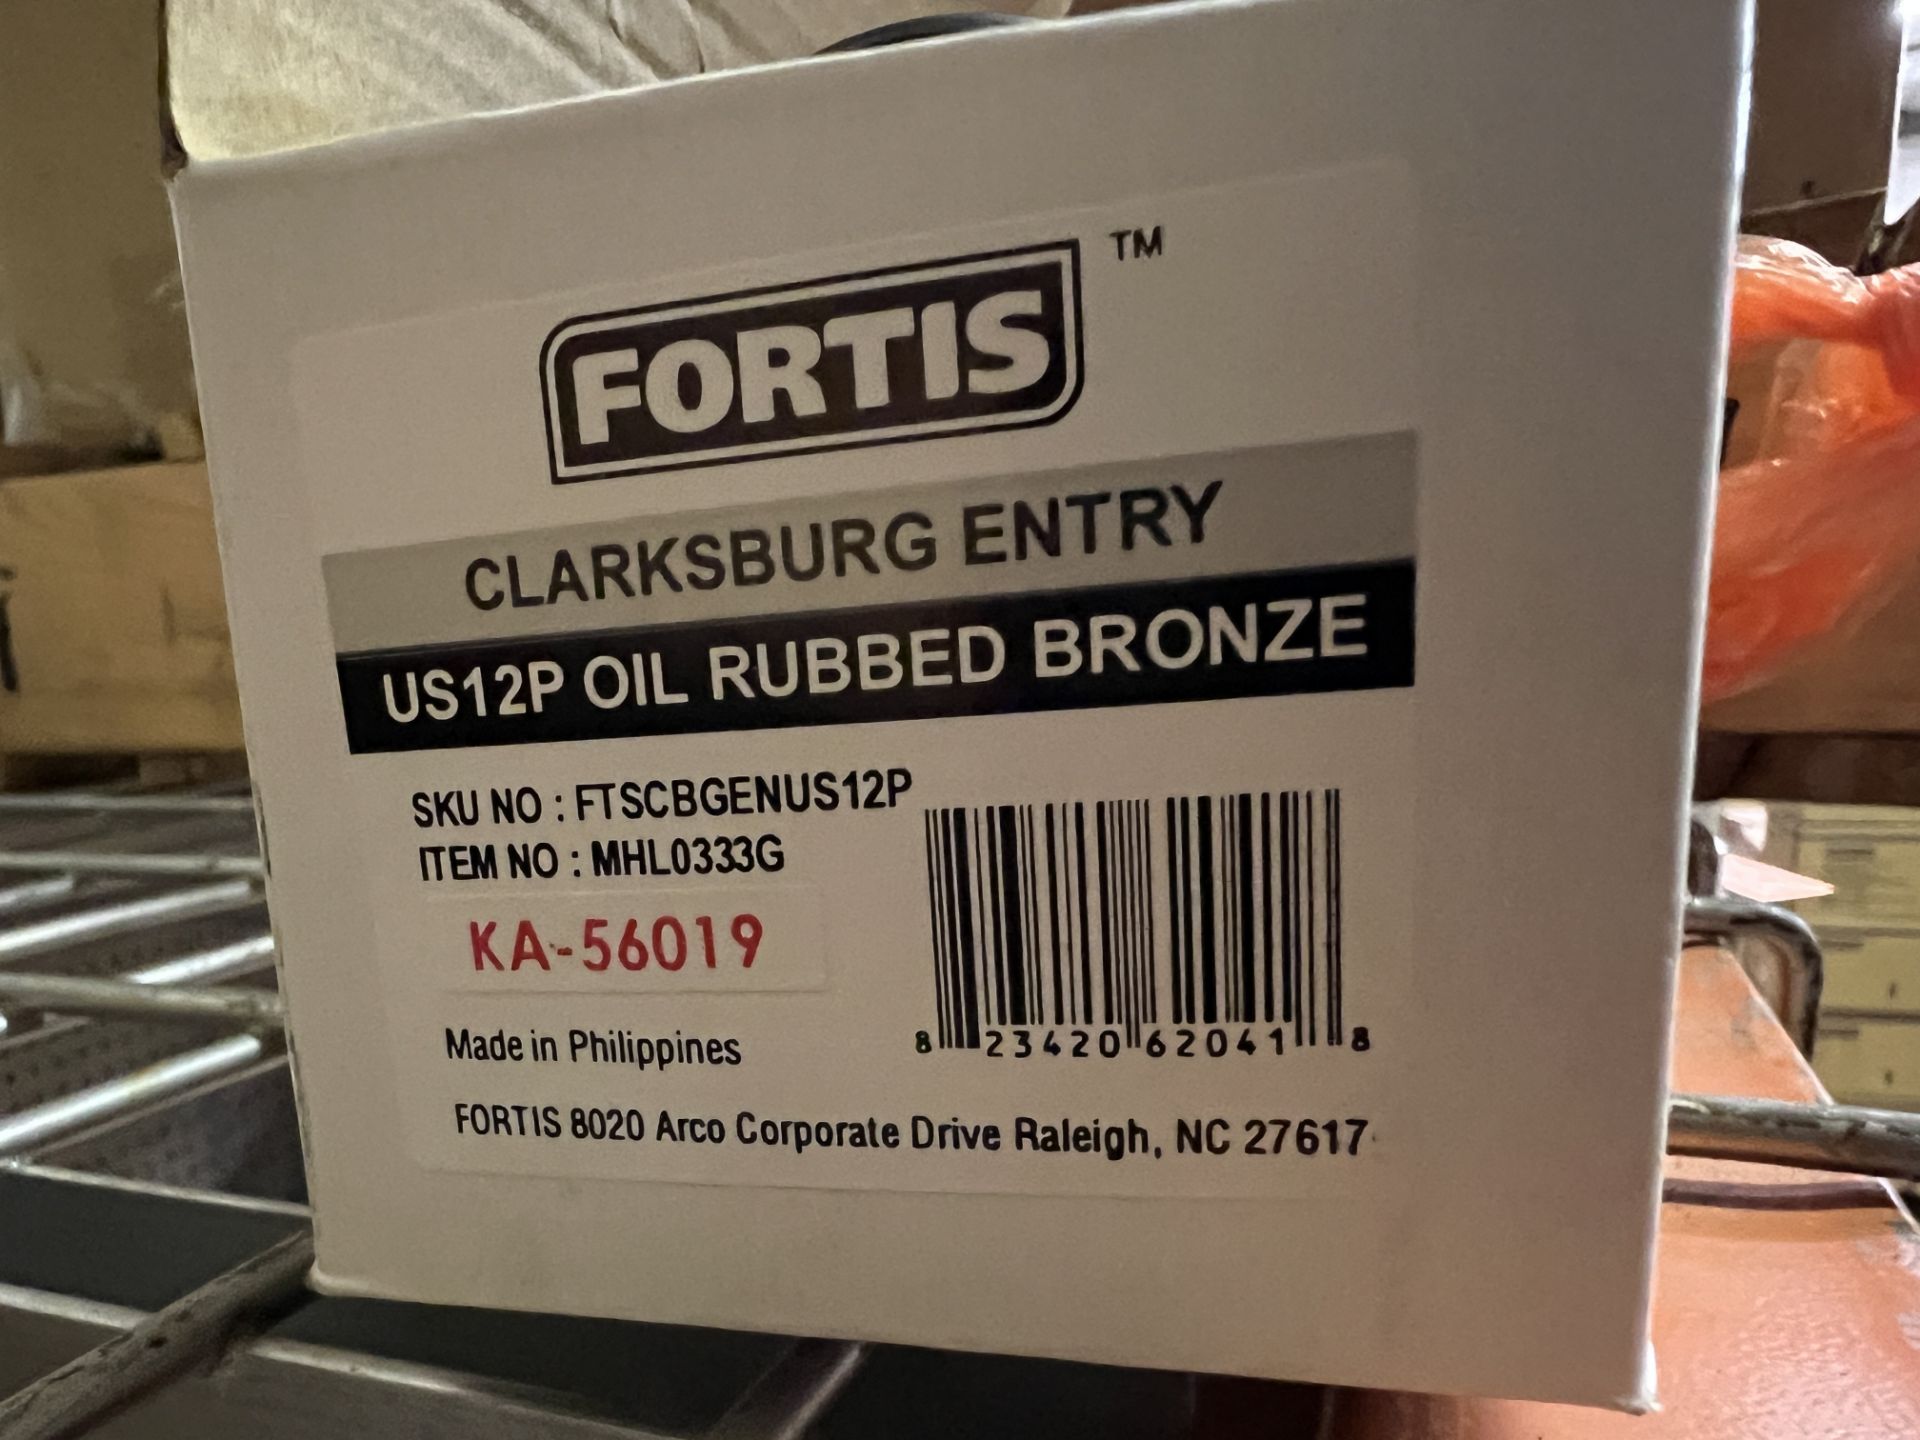 (20) FORTIS CLARKSBURG ENTRY US12P OIL RUBBED BRONZE - Image 2 of 3